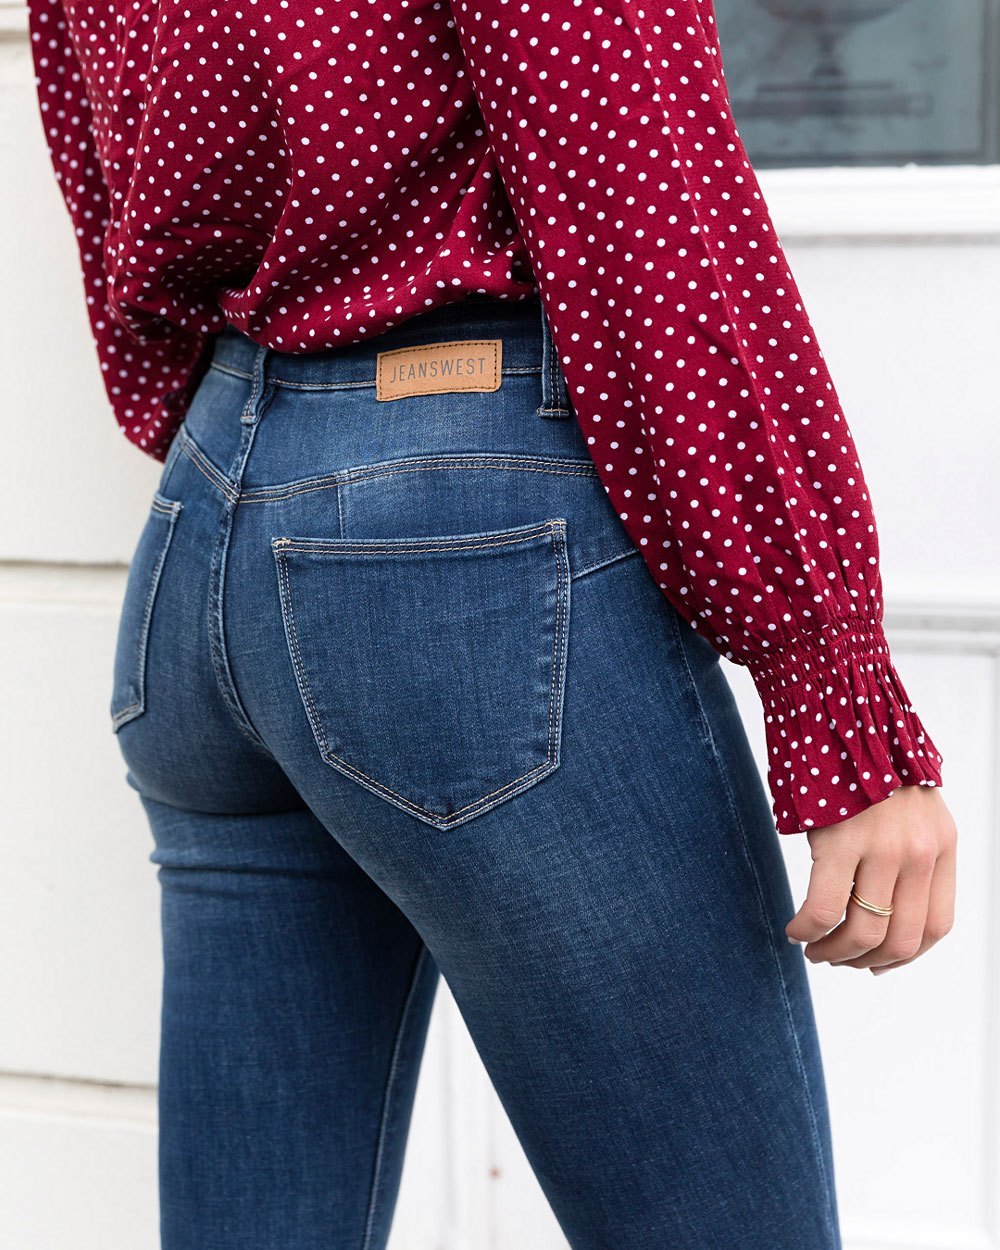 IN THE SPOTLIGHT: OUR AMAZING BUTT LIFTER JEANS